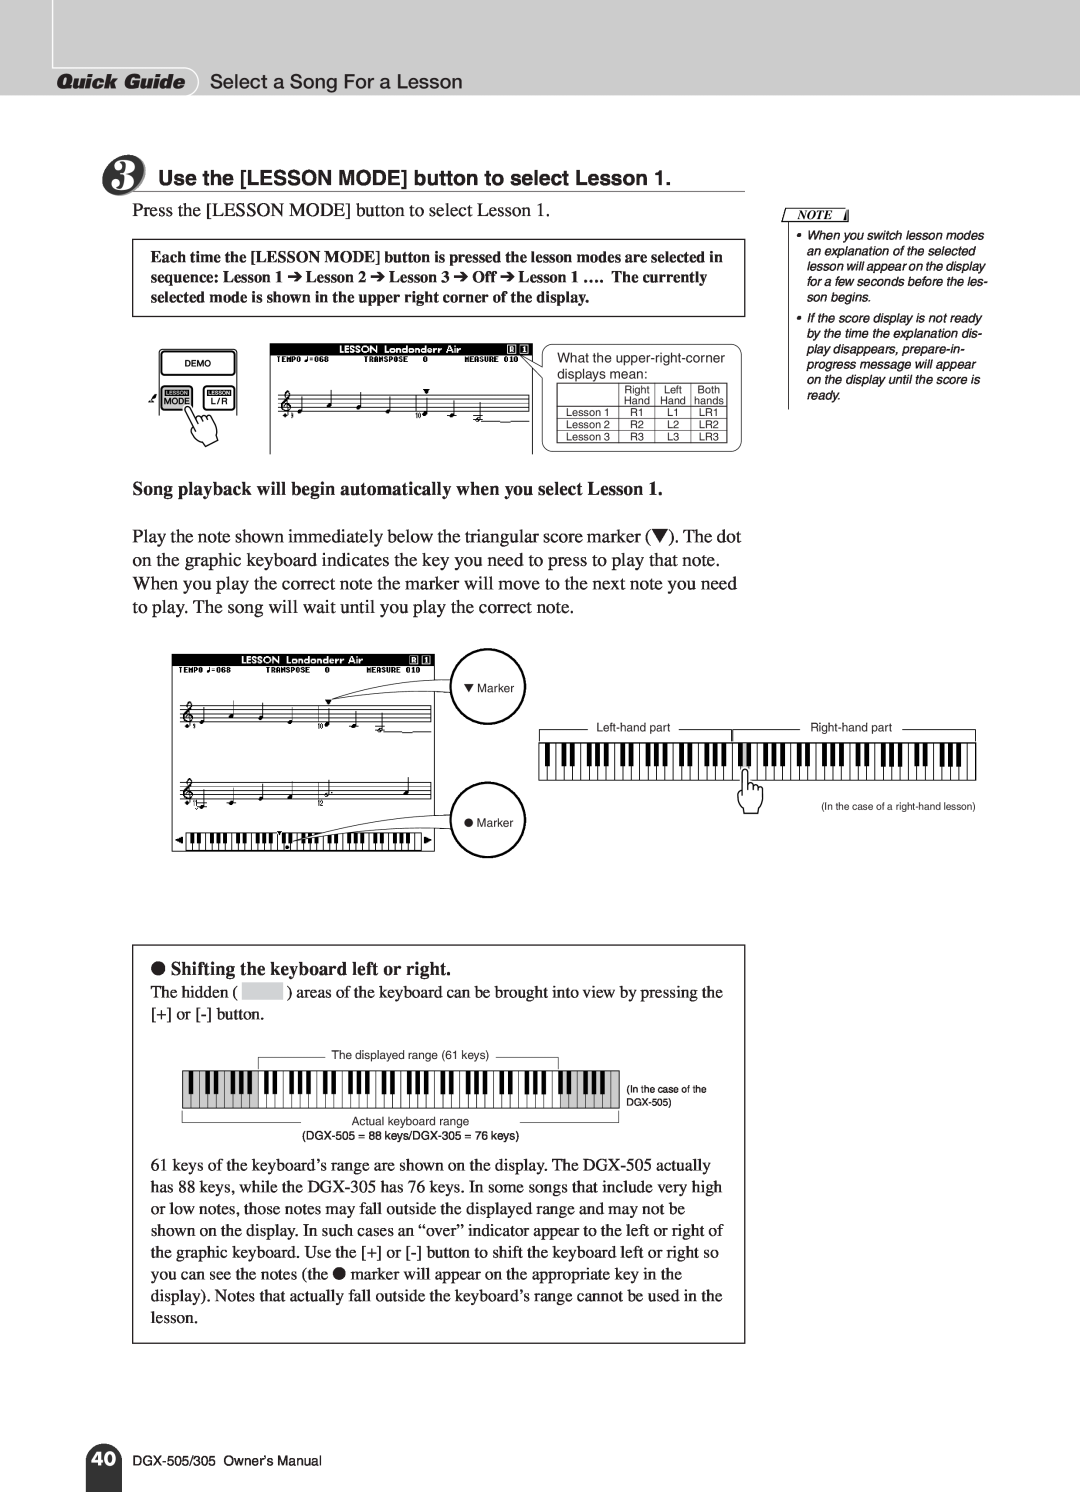 Yamaha DGX-505, DGX-305 manual Quick Guide Select a Song For a Lesson, Use the LESSON MODE button to select Lesson 